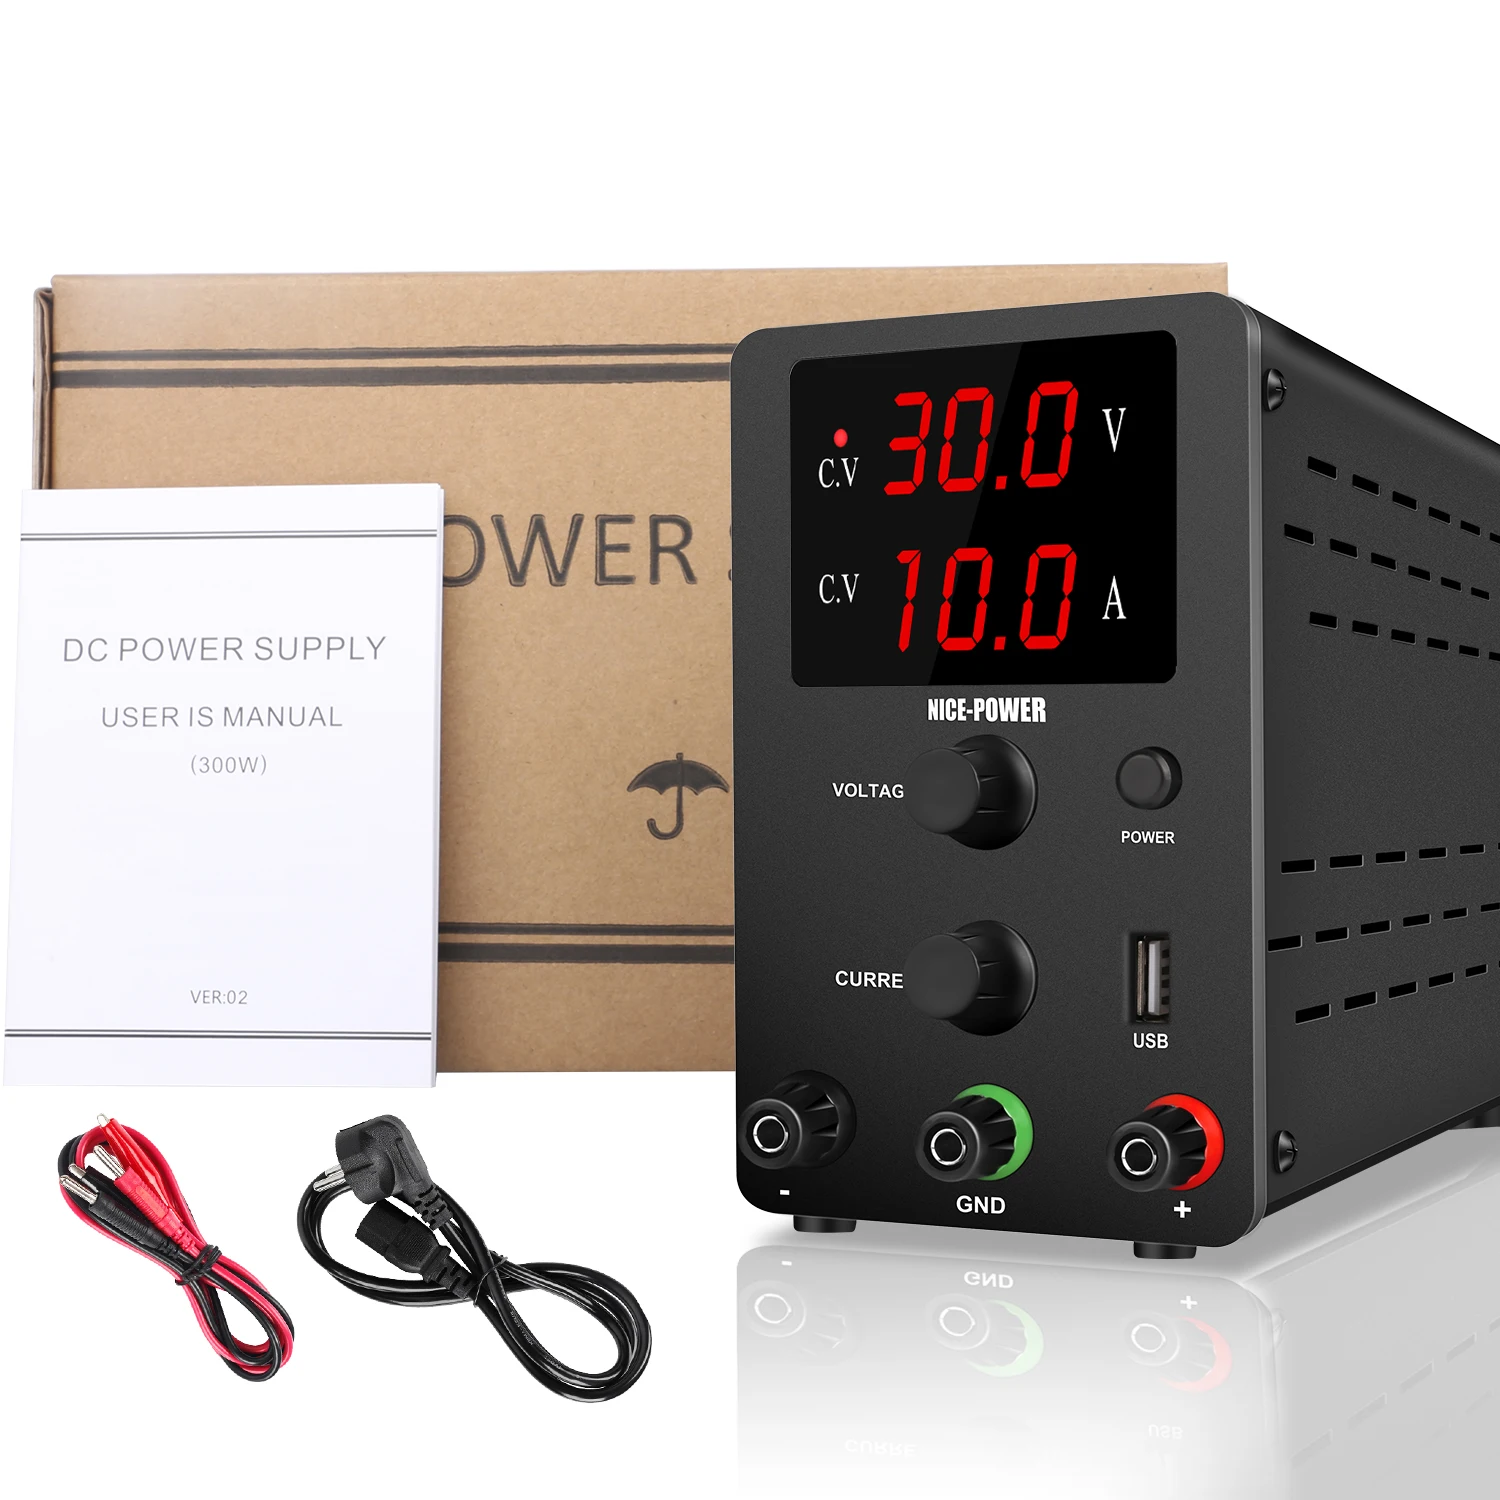 S7a5b6b642b3f4ba39d93fd51490c05be5 DC Power Supplies Adjustable Switching Voltage Regulator 30V10A/30V5A Laboratory Power Supply USB Interface LED Drone Charging